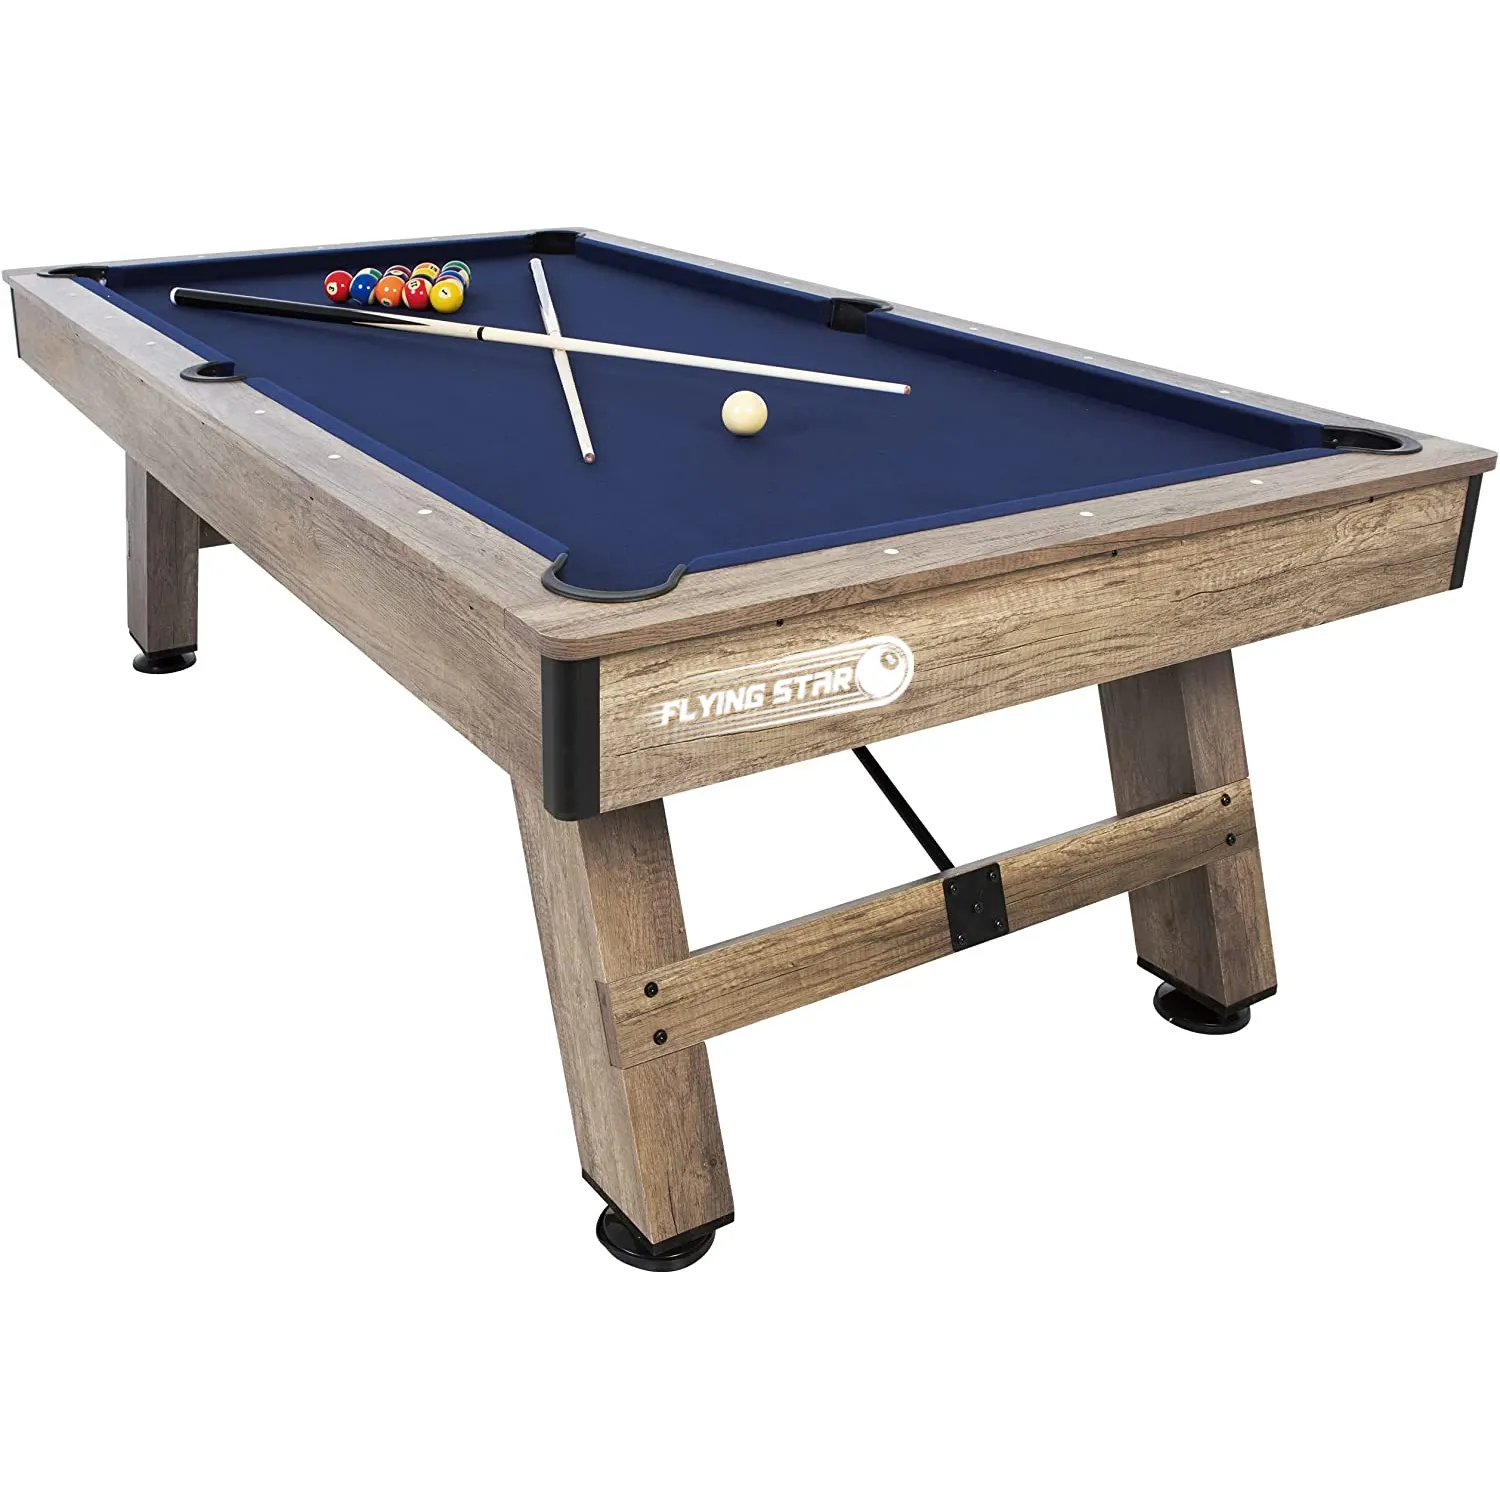 Style Price of Billiard Table 9ft 8ft Indoor Outdoor Luxury Design Snooker Pool Table Manufacturer Supplier Modern for Family FS